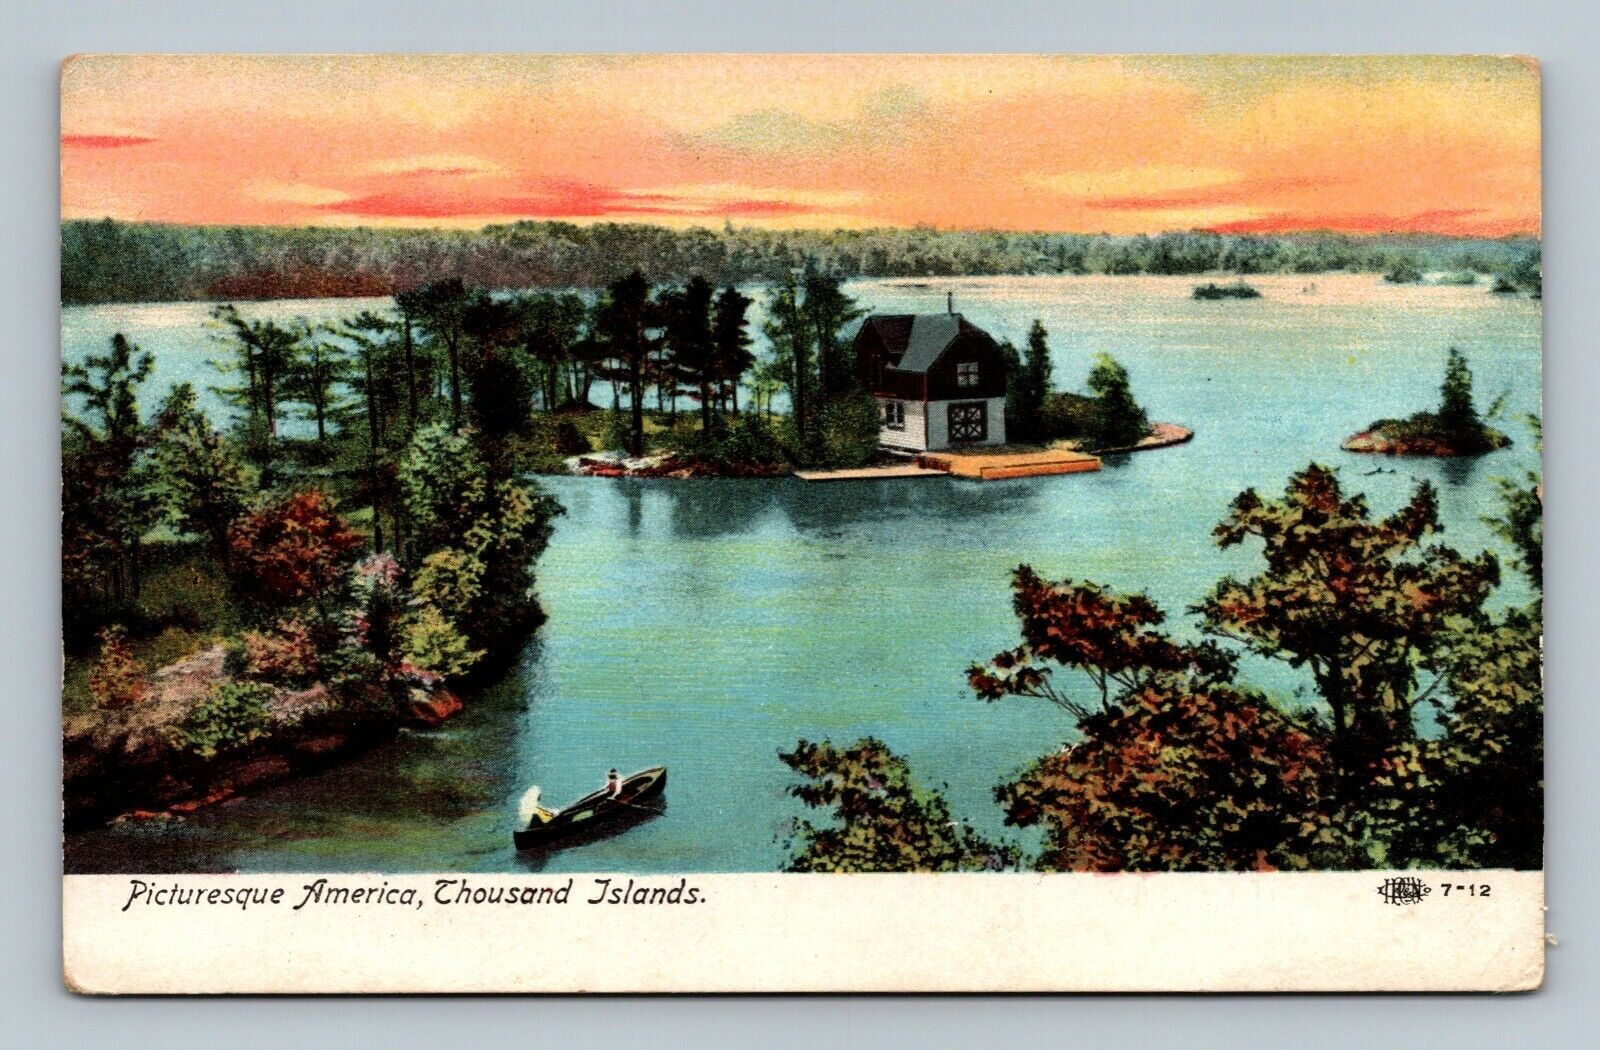 Postcard Picturesque America Thousand Islands POSTED